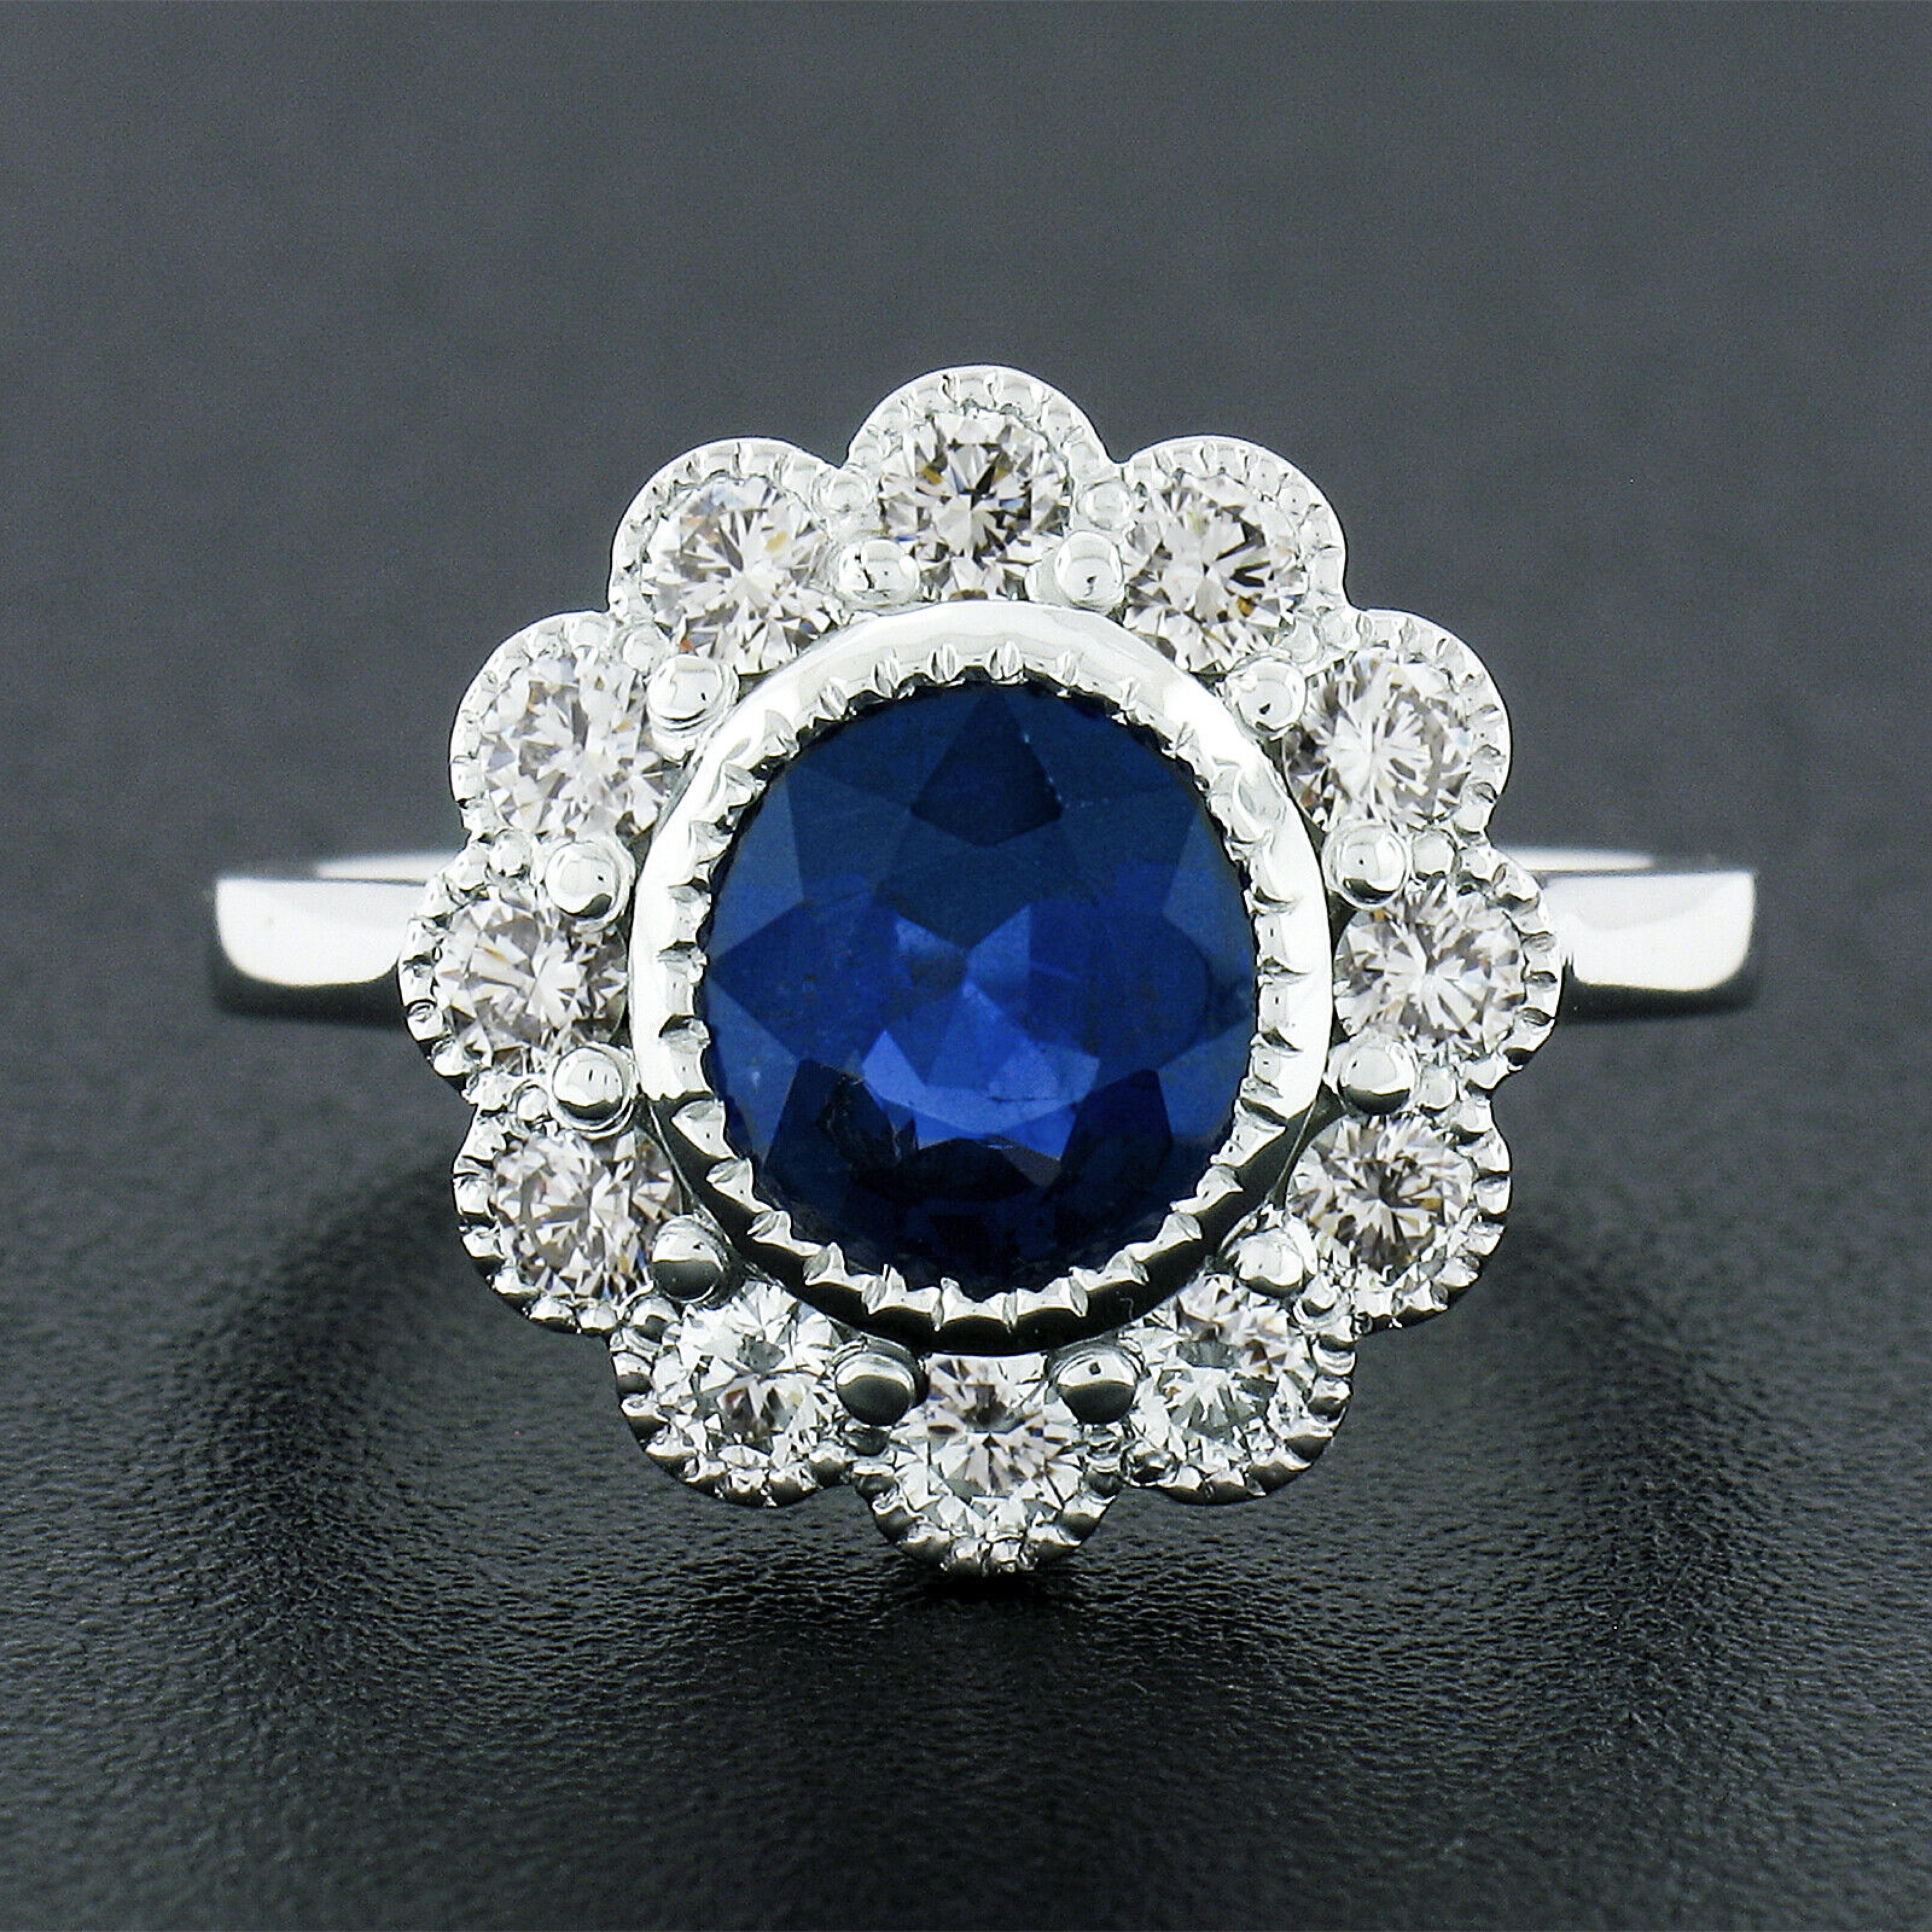 This truly breathtaking engagement or cocktail ring is newly crafted in solid platinum and features a TOP QUALITY, GIA certified, sapphire at its center. The beautiful gemstone has an oval brilliant cut and displays the most gorgeous and velvety